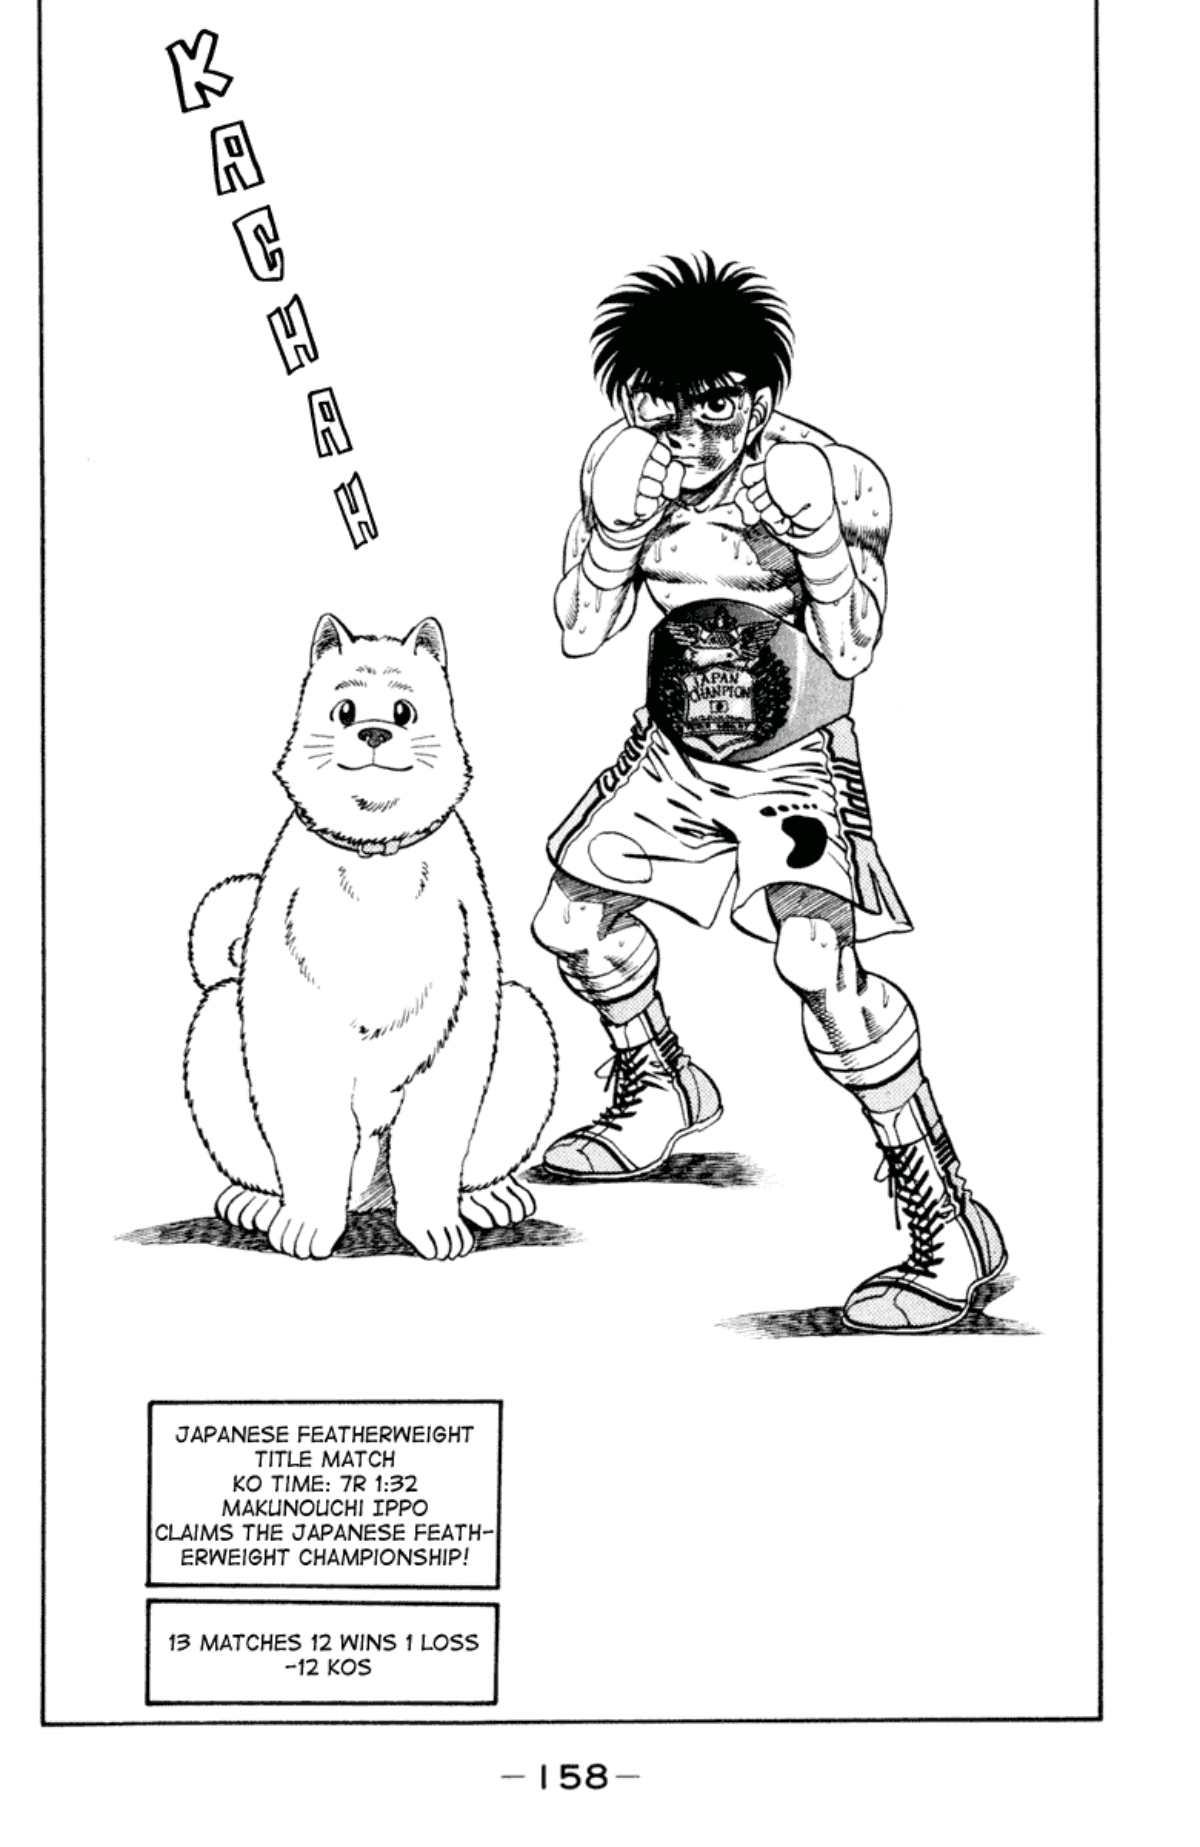 Ippo stands in a fighting pose beside a large dog. The championship belt is around his waist. His record is 13 fights, 12 wins, 1 loss.